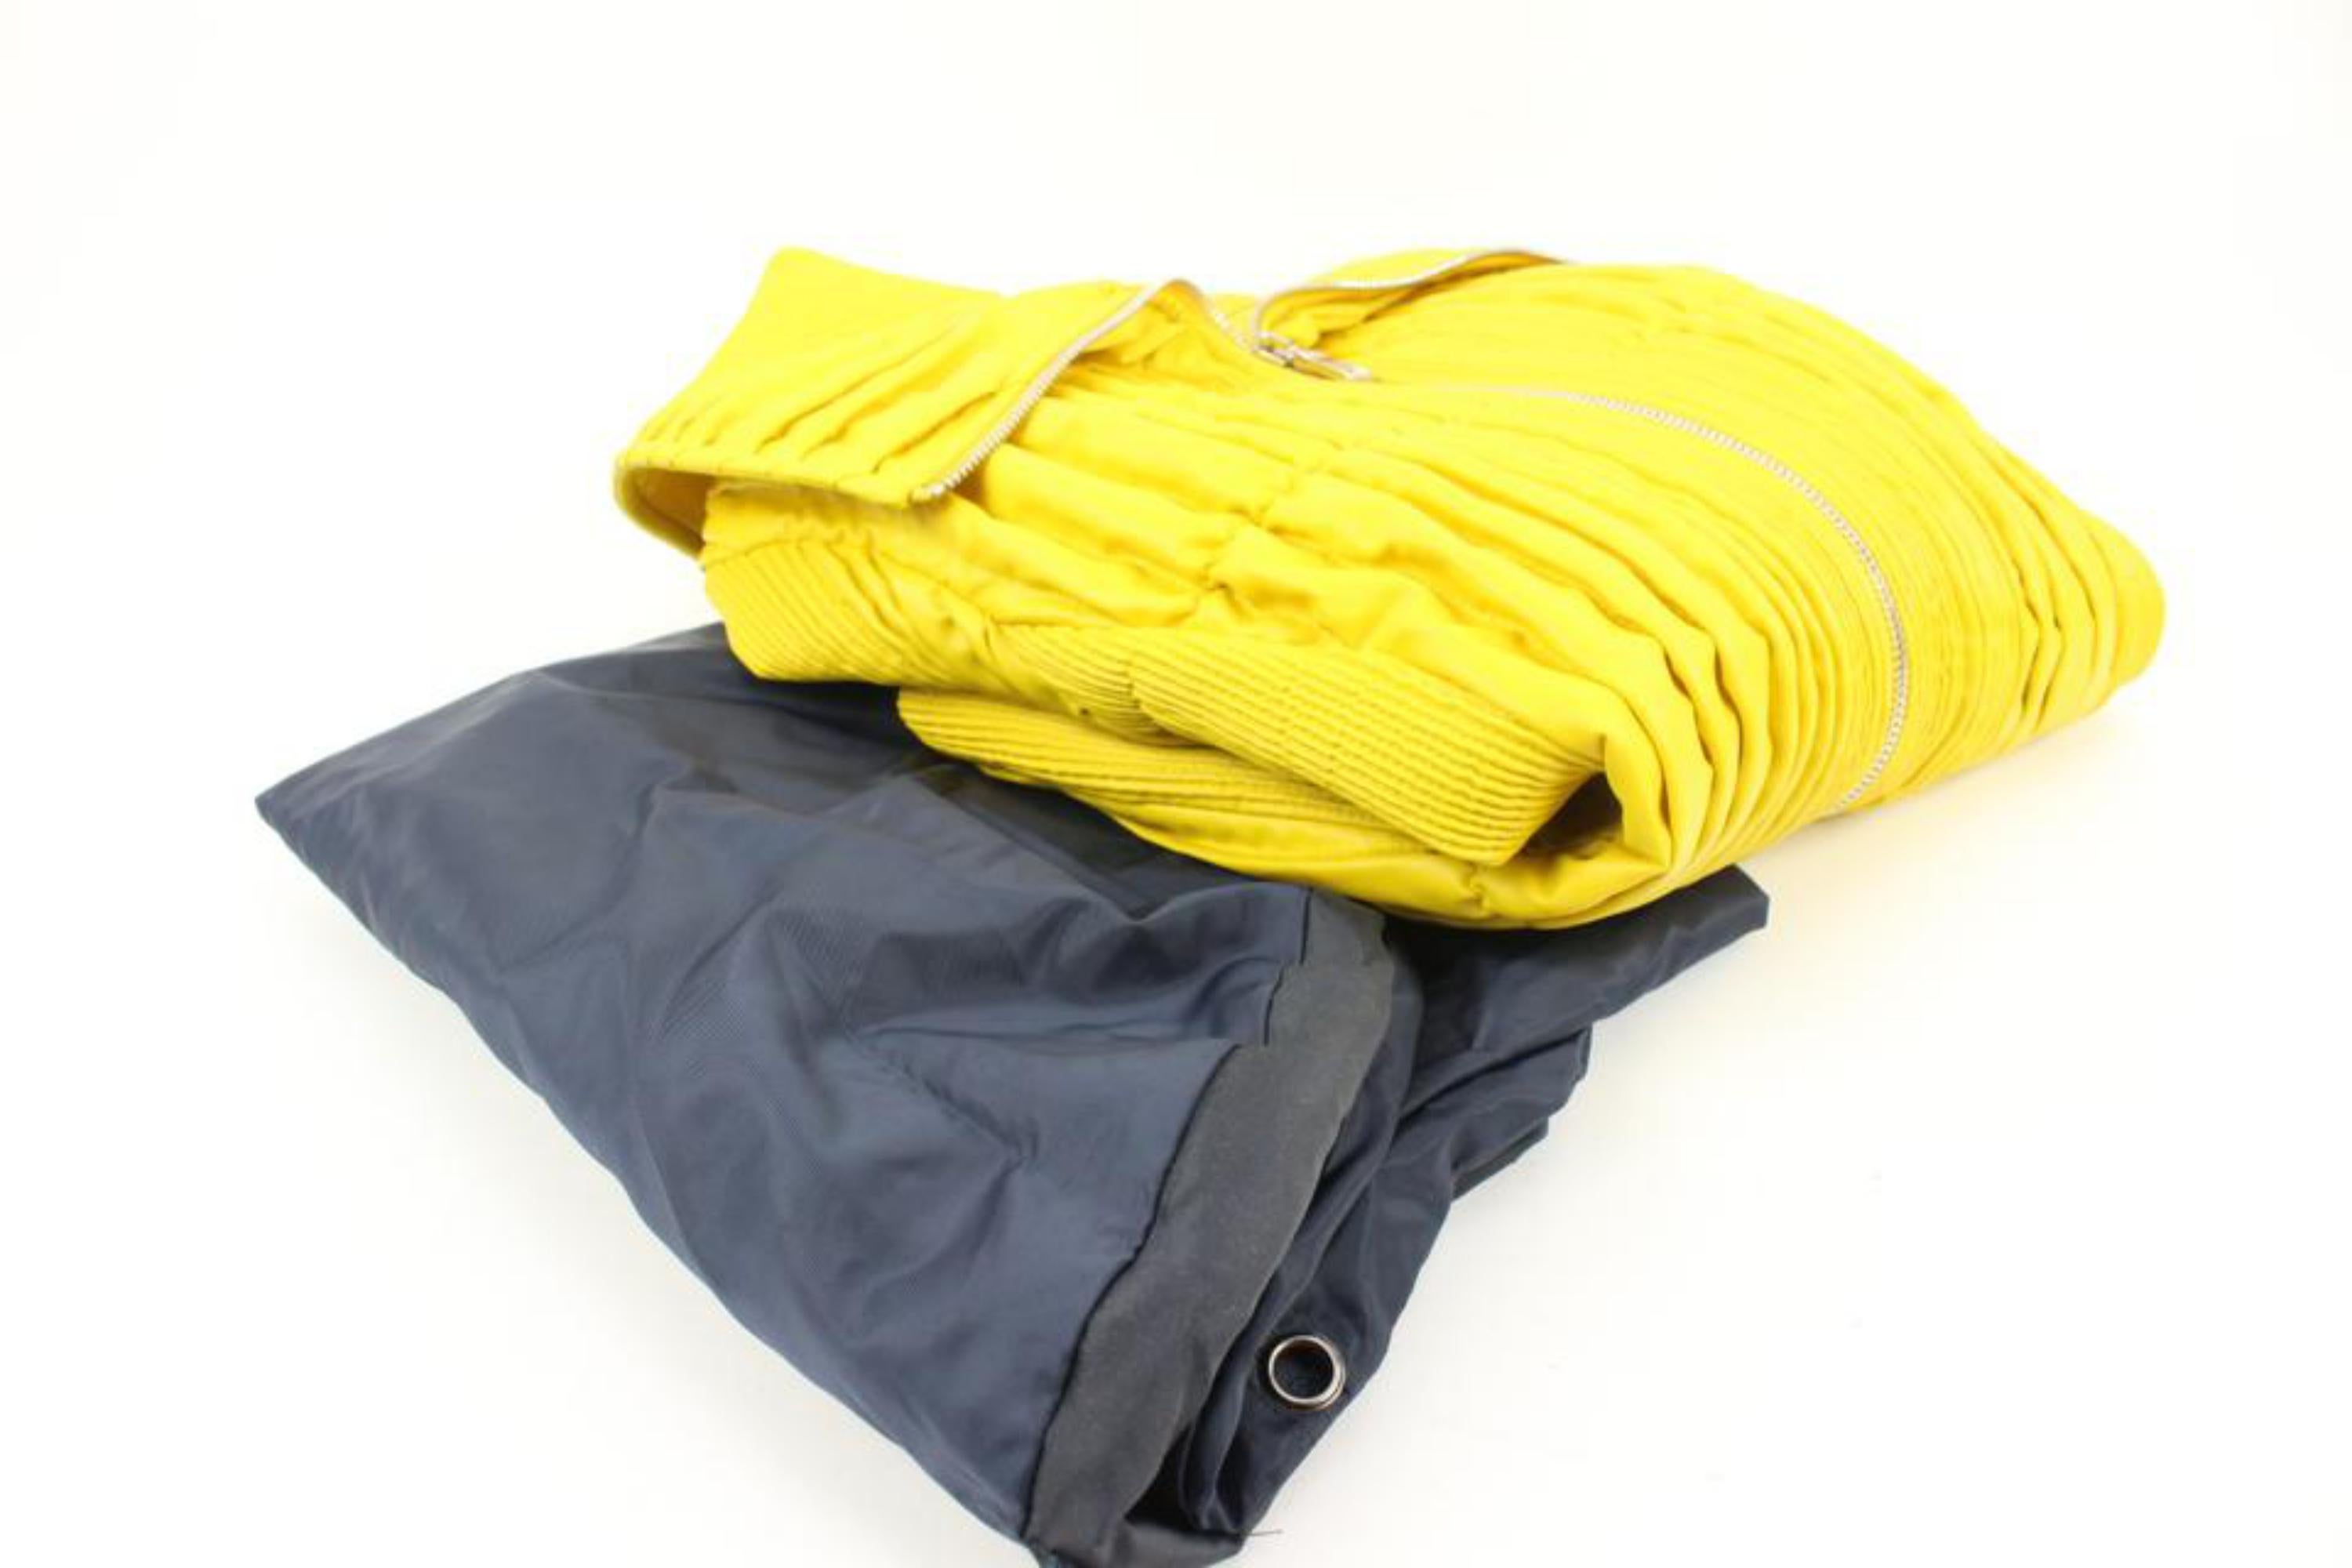 Prada Women's 34 US Yellow Quilted Blouson Jacket 121PR44 In Excellent Condition For Sale In Dix hills, NY